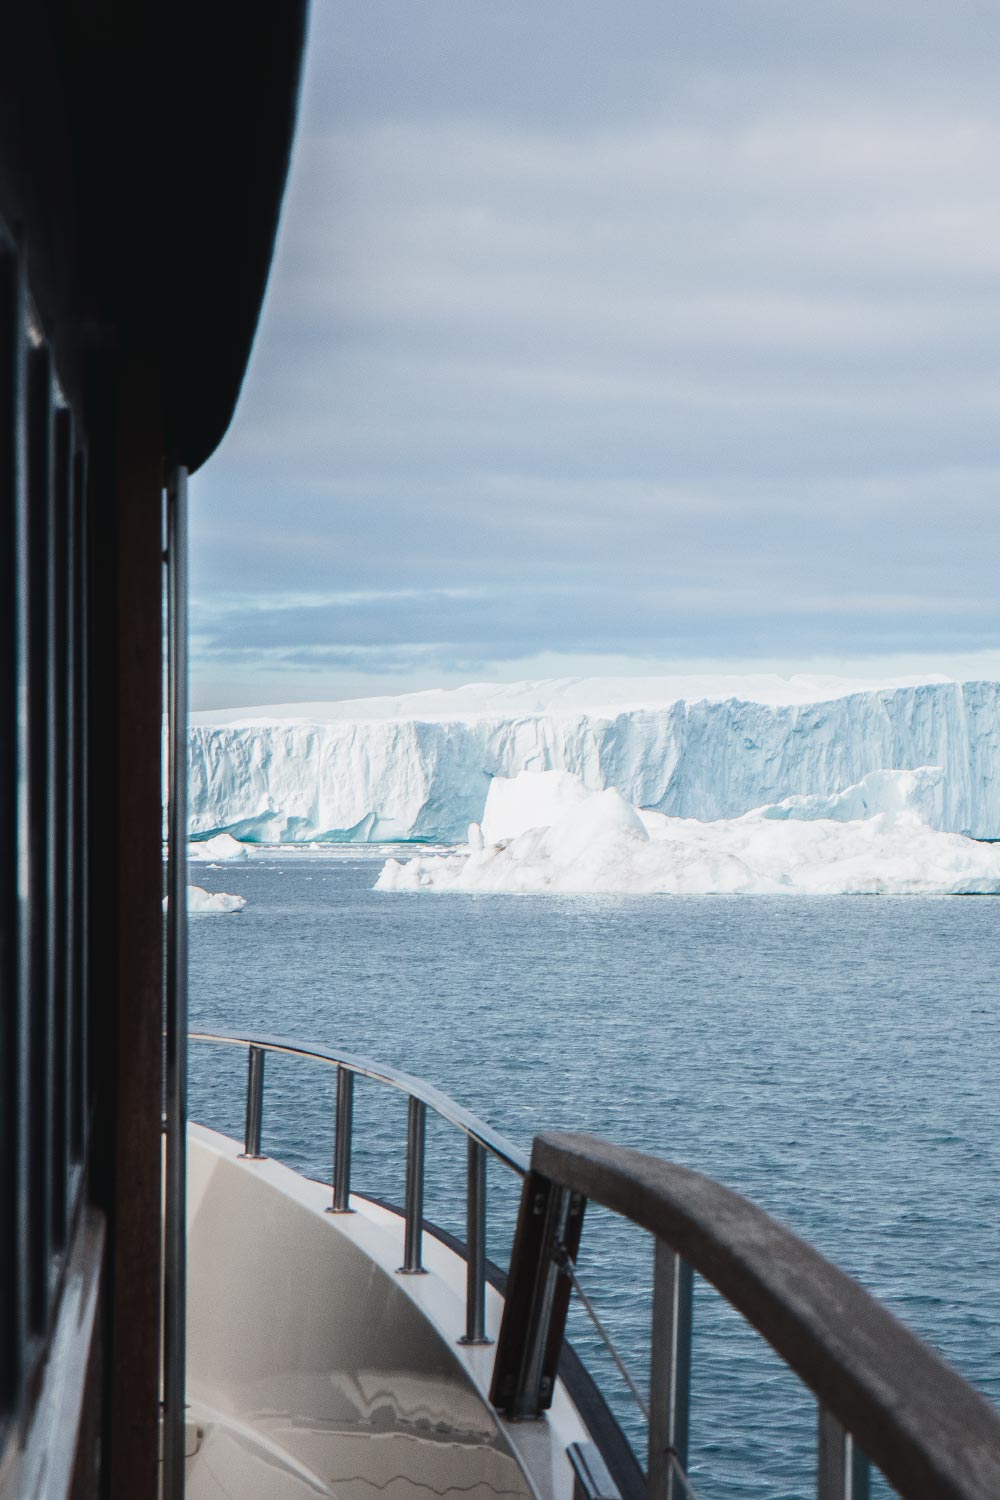 Spotting whales near Ilulissat: Spectacular views on a 10-day summer itinerary in Greenland